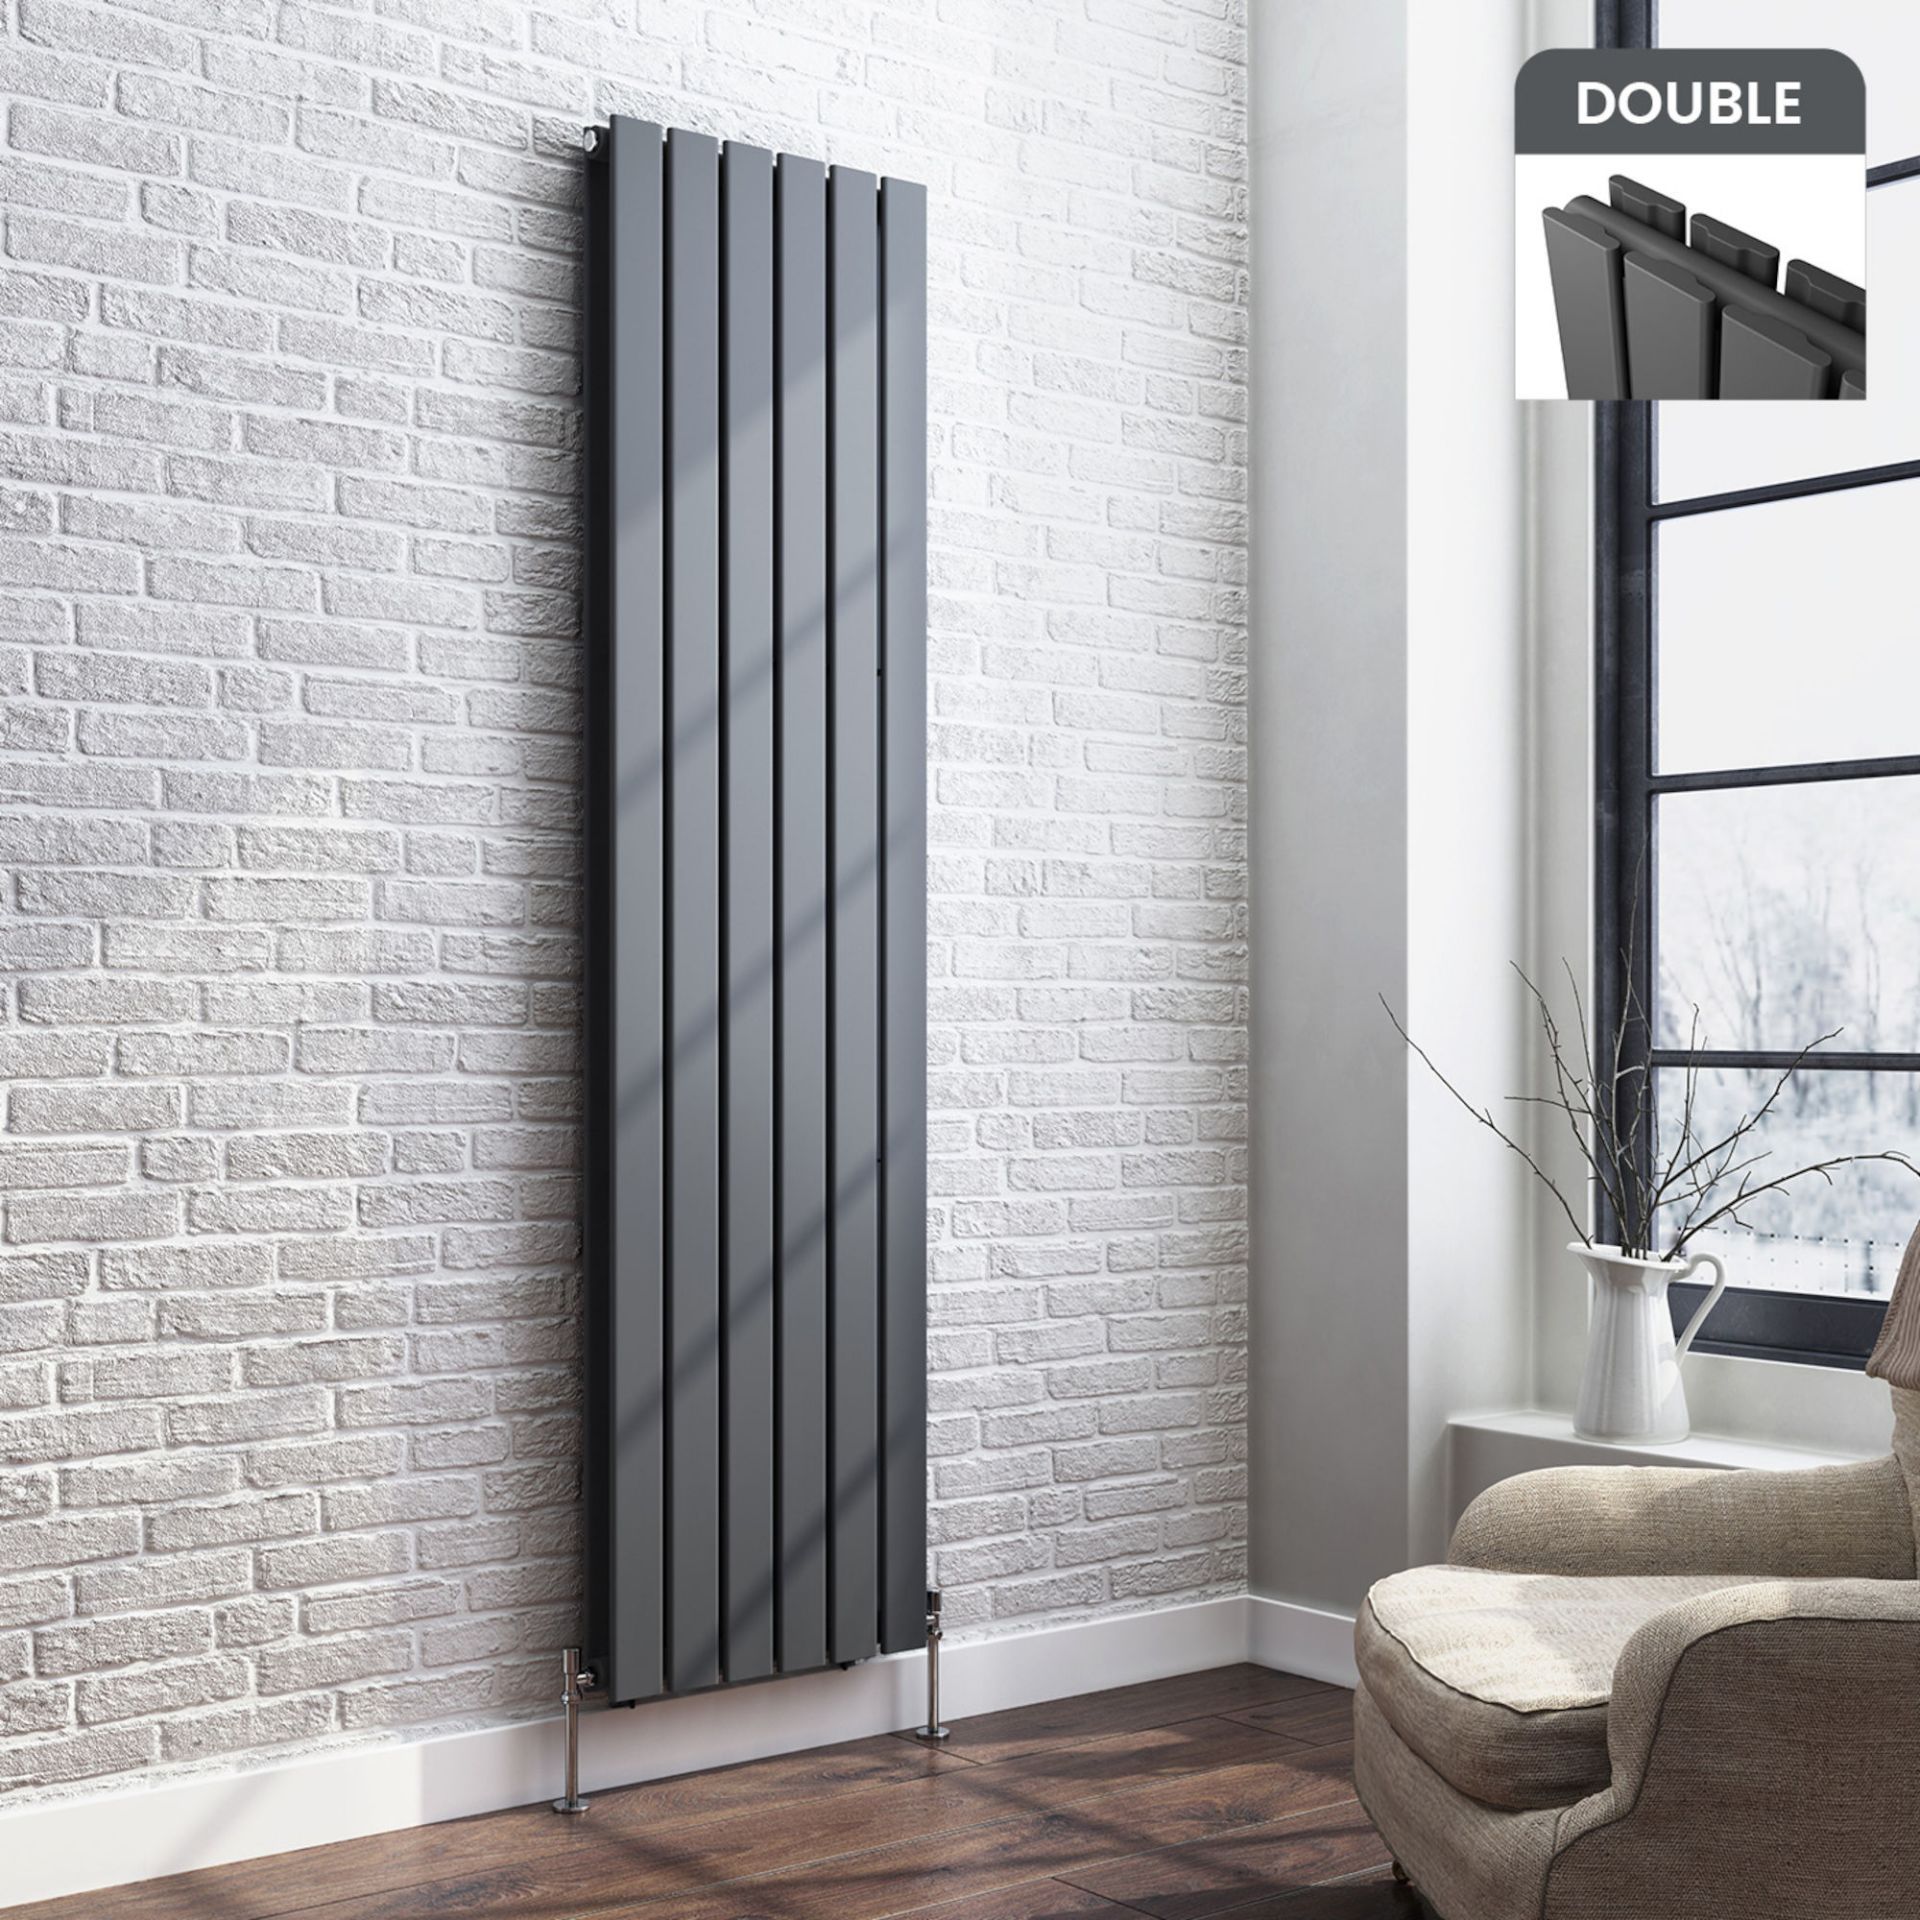 1800x480mm Anthracite Double Flat Panel Vertical Radiator. RRP £499.99. Made with low carbon